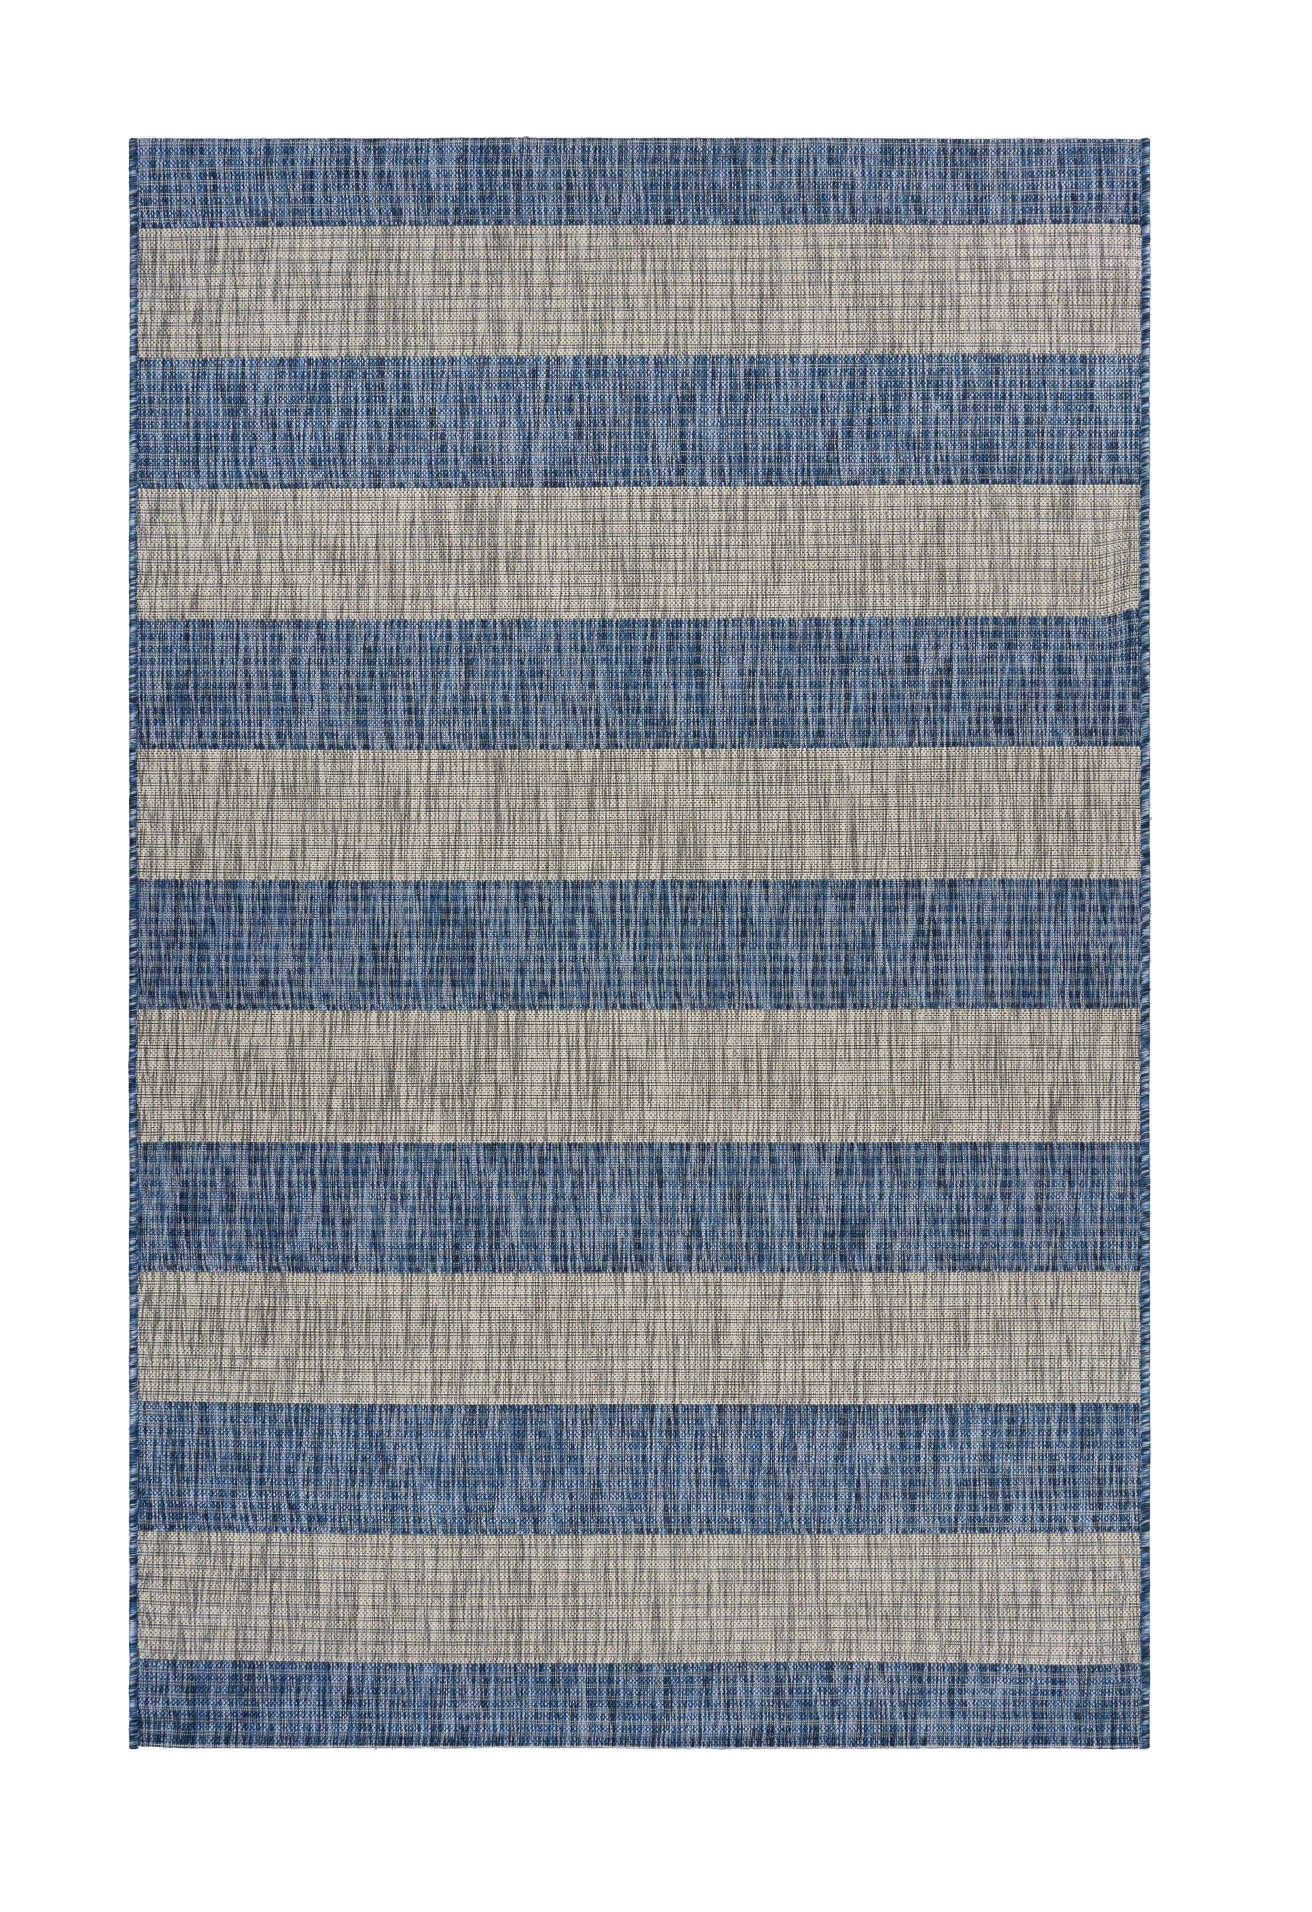 8' X 10' Blue And Gray Striped Indoor Outdoor Area Rug-393761-1